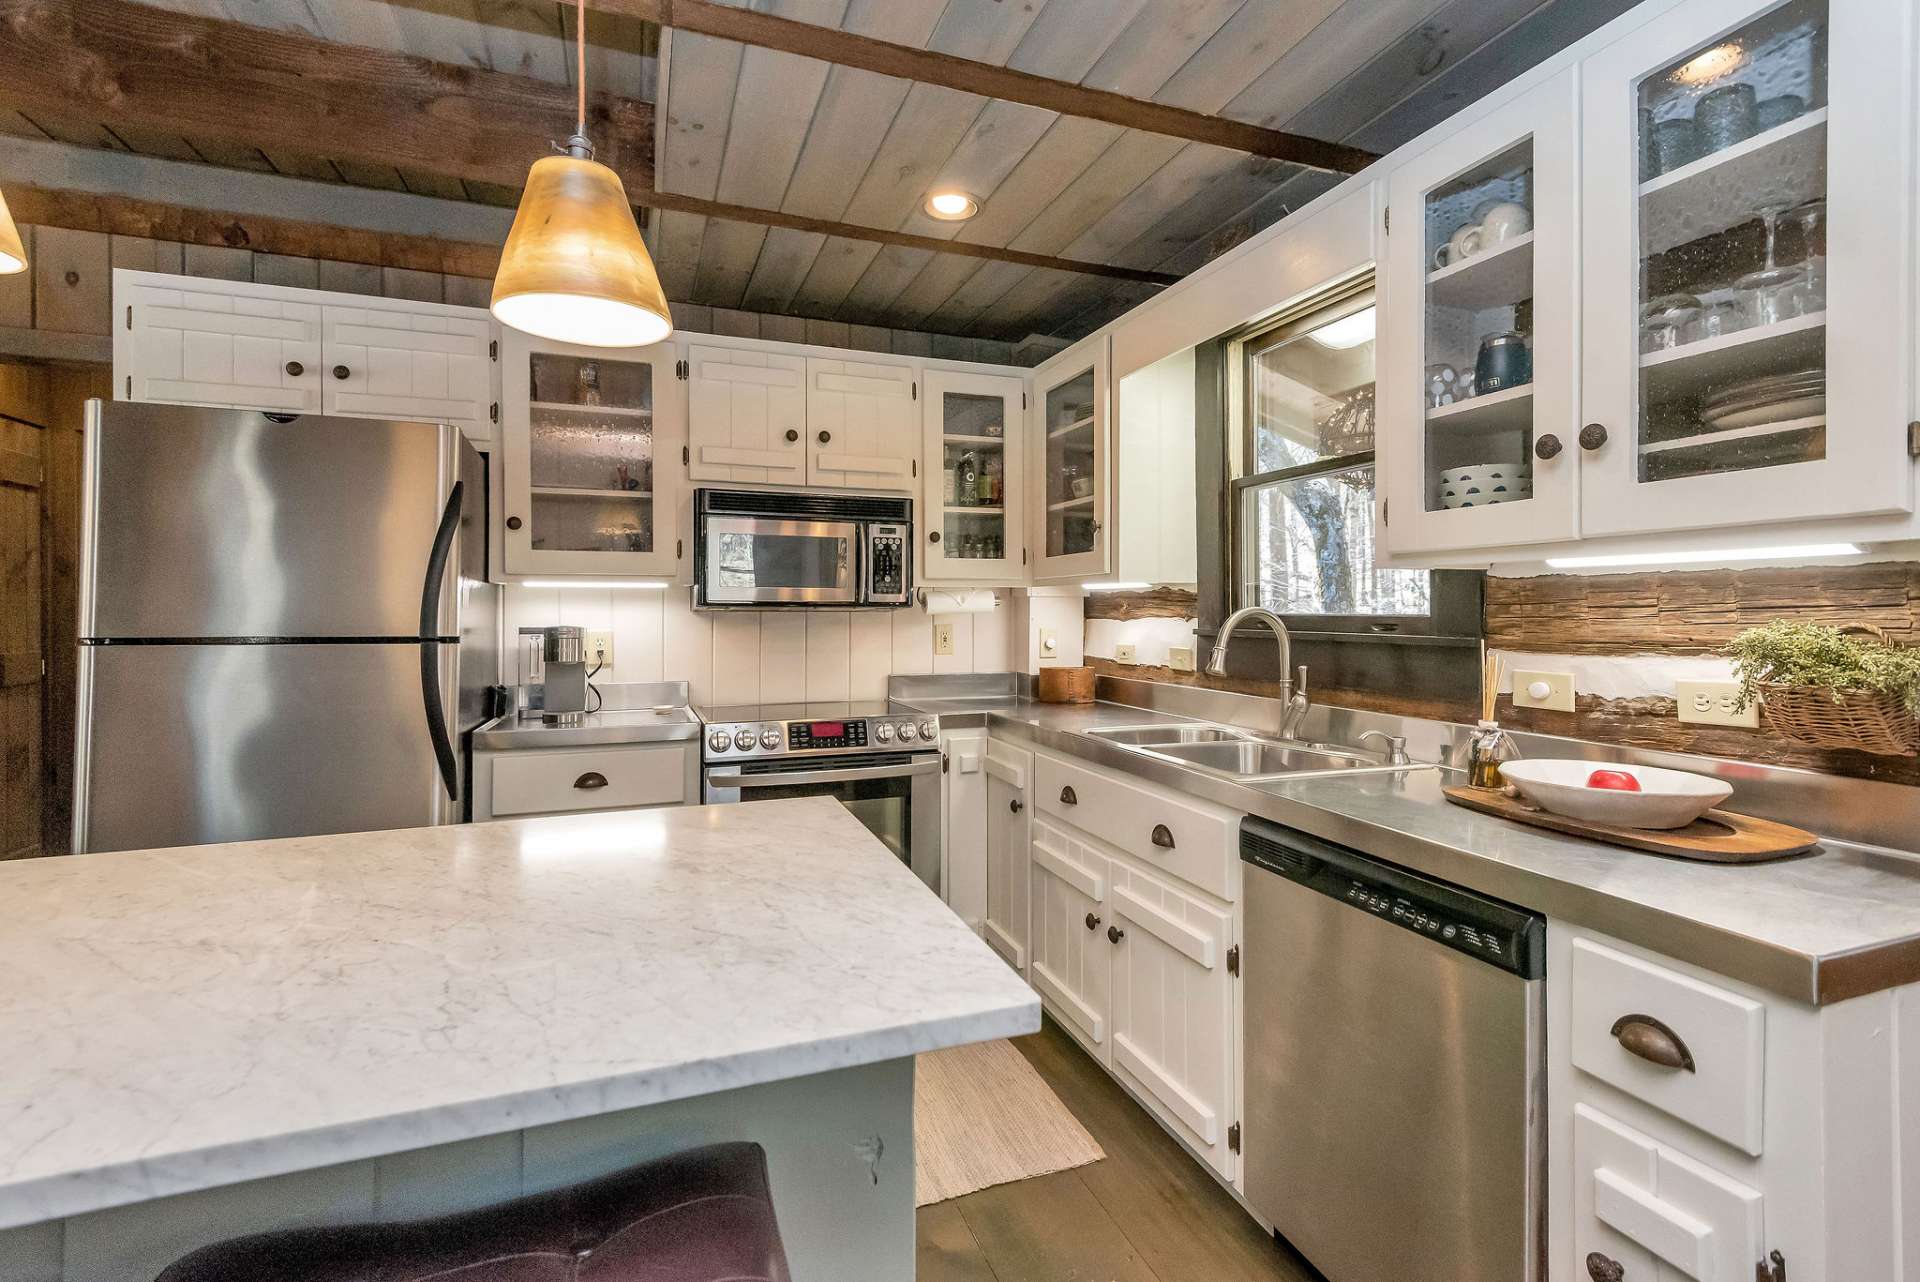 One of the standout features of the kitchen is its unique stainless steel countertops. The sleek, industrial-inspired surface provides a striking contrast to the warmth of the cabin's rustic elements, adding a touch of contemporary flair to the space.